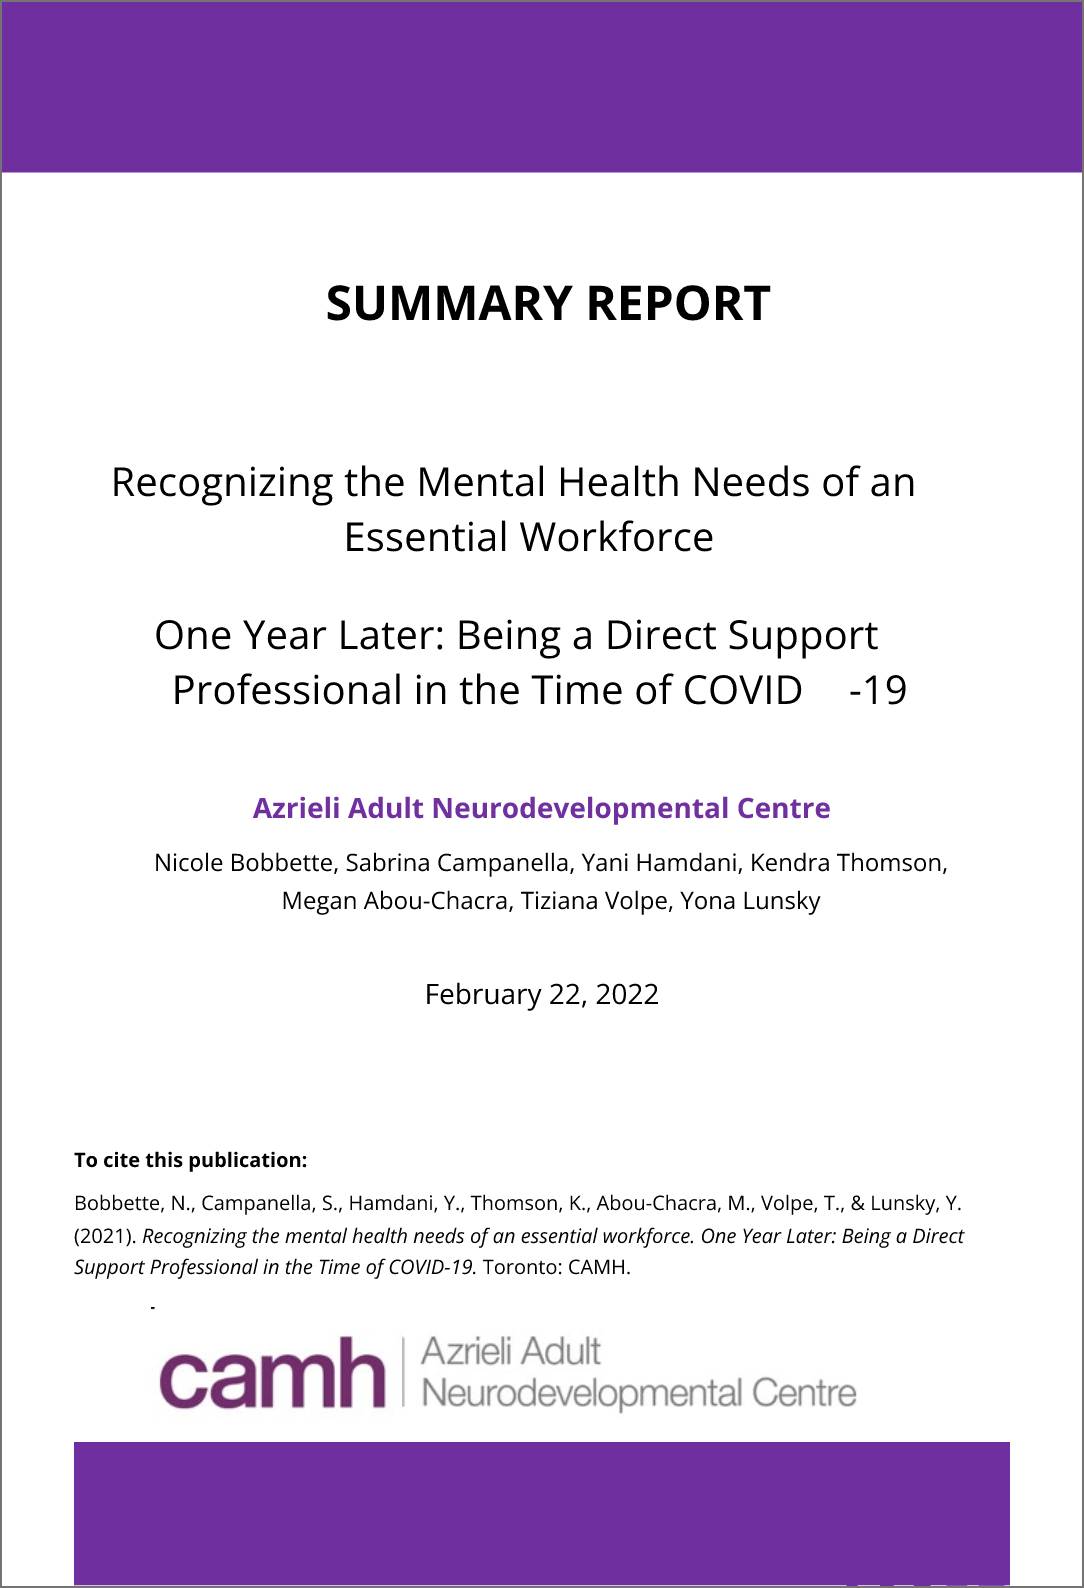 Recognizing the Mental Health Needs of an Essential Workforce. One Year Later: Being a Direct Support Professional in the Time of COVID-19